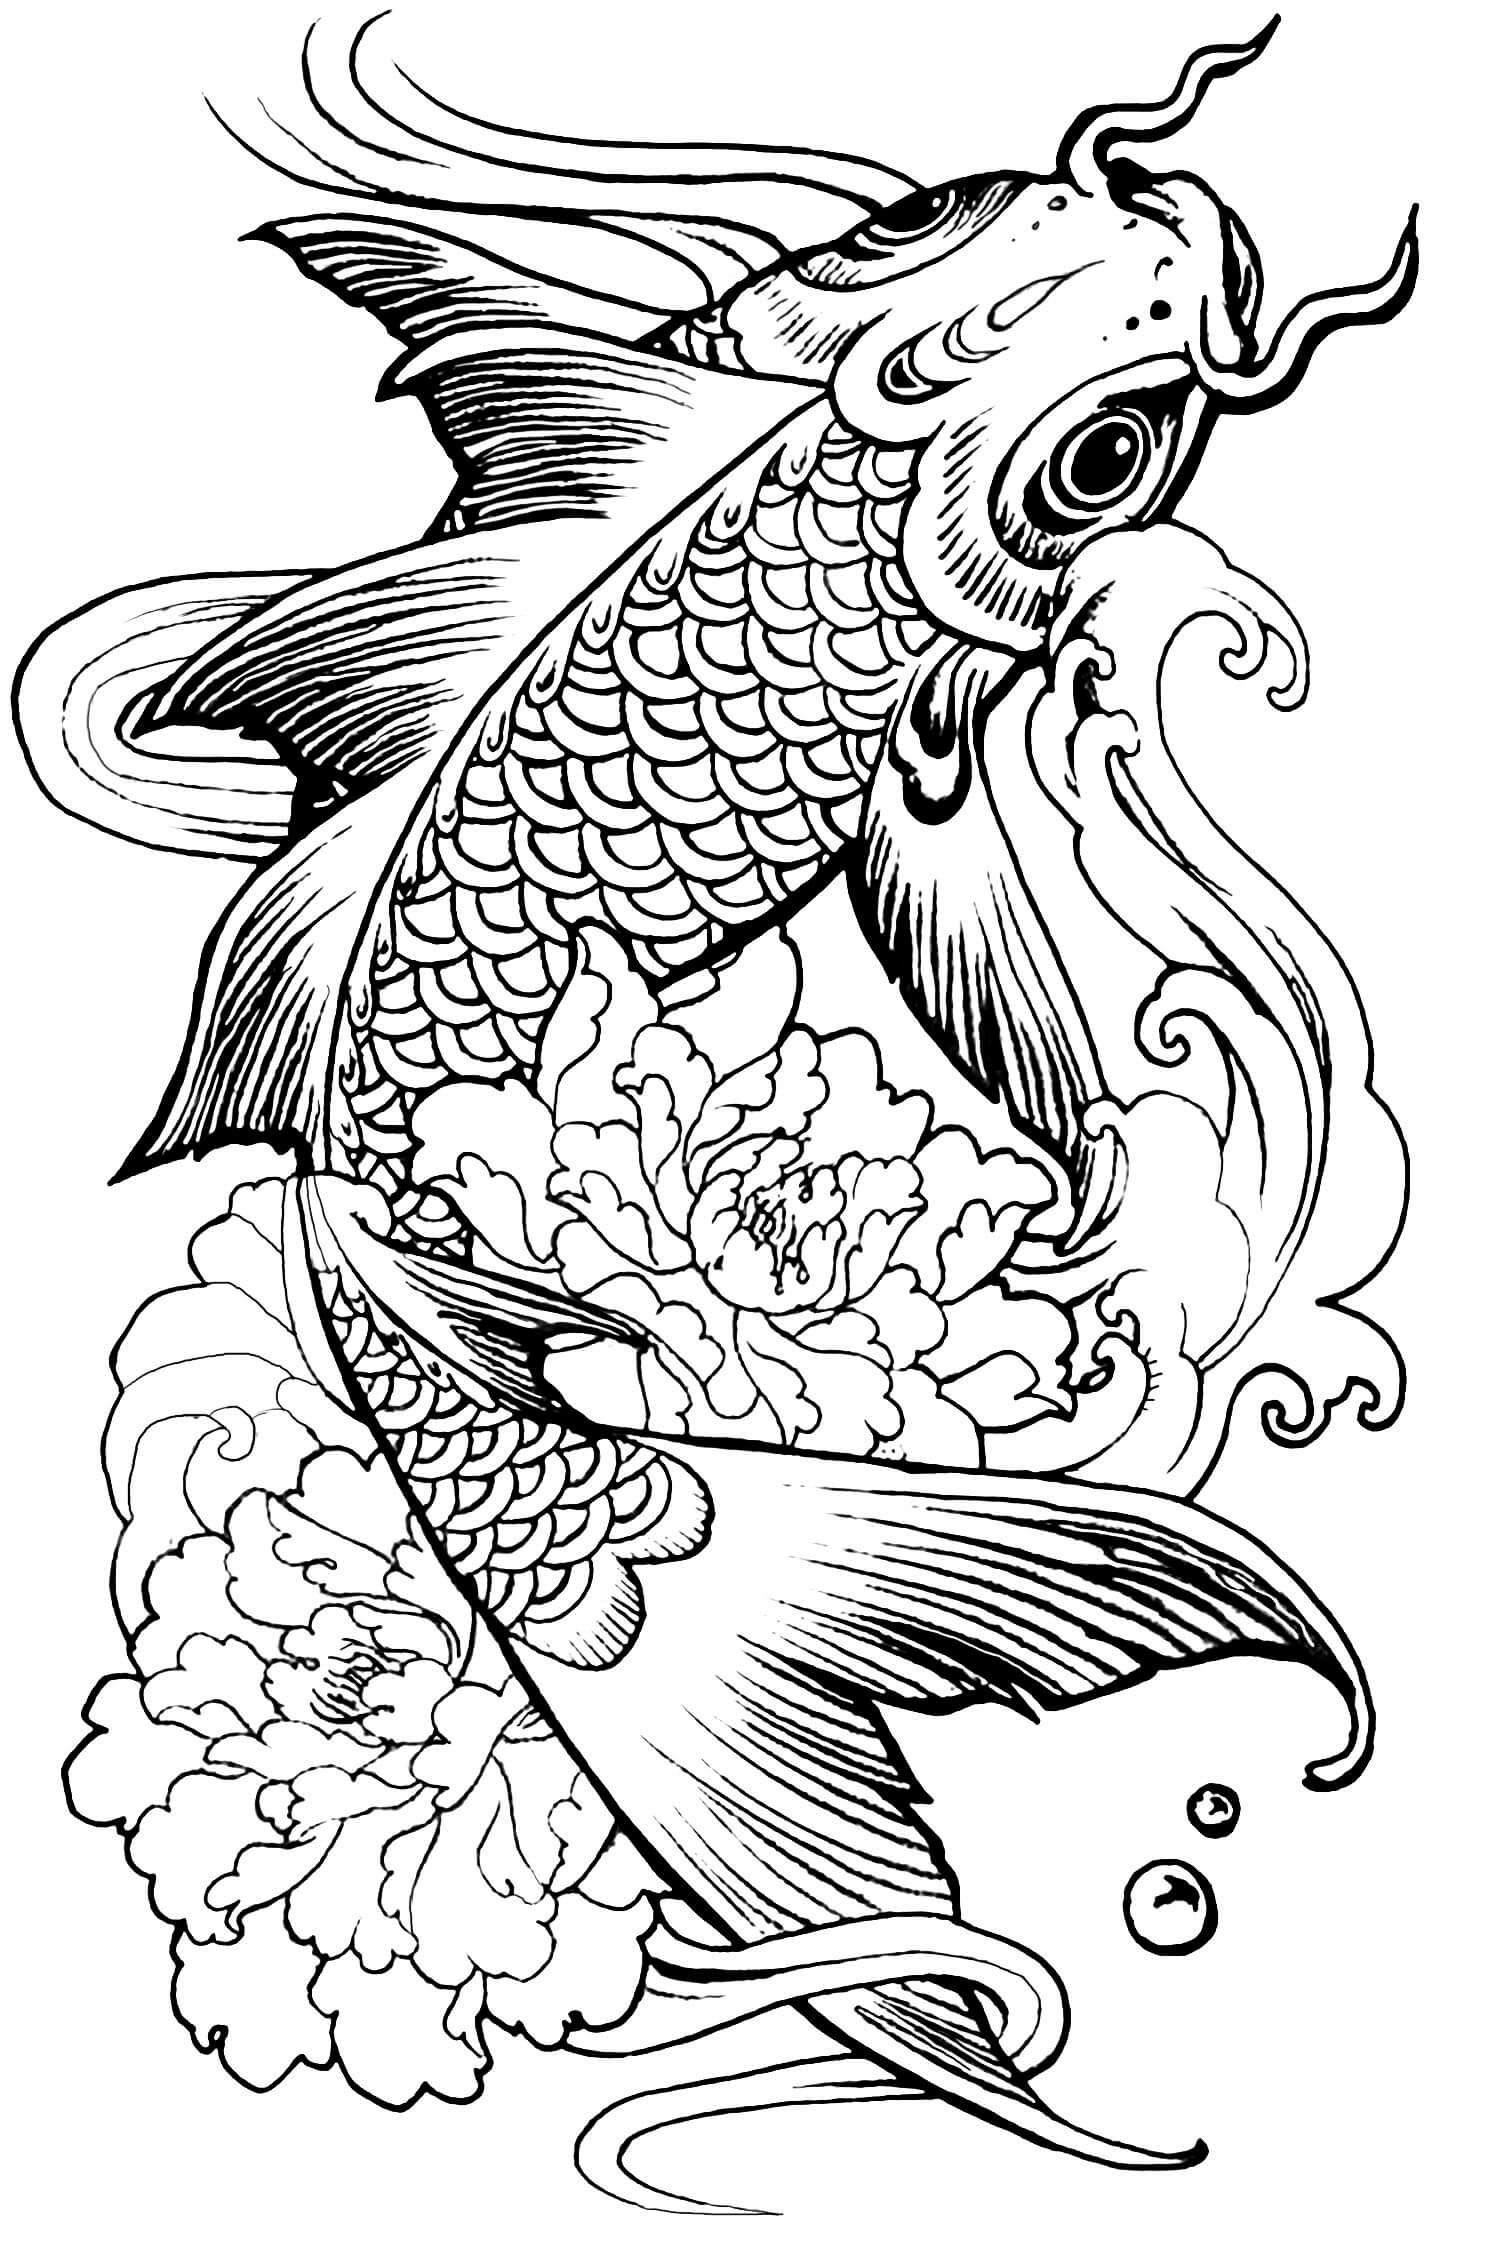 Animal coloring pages